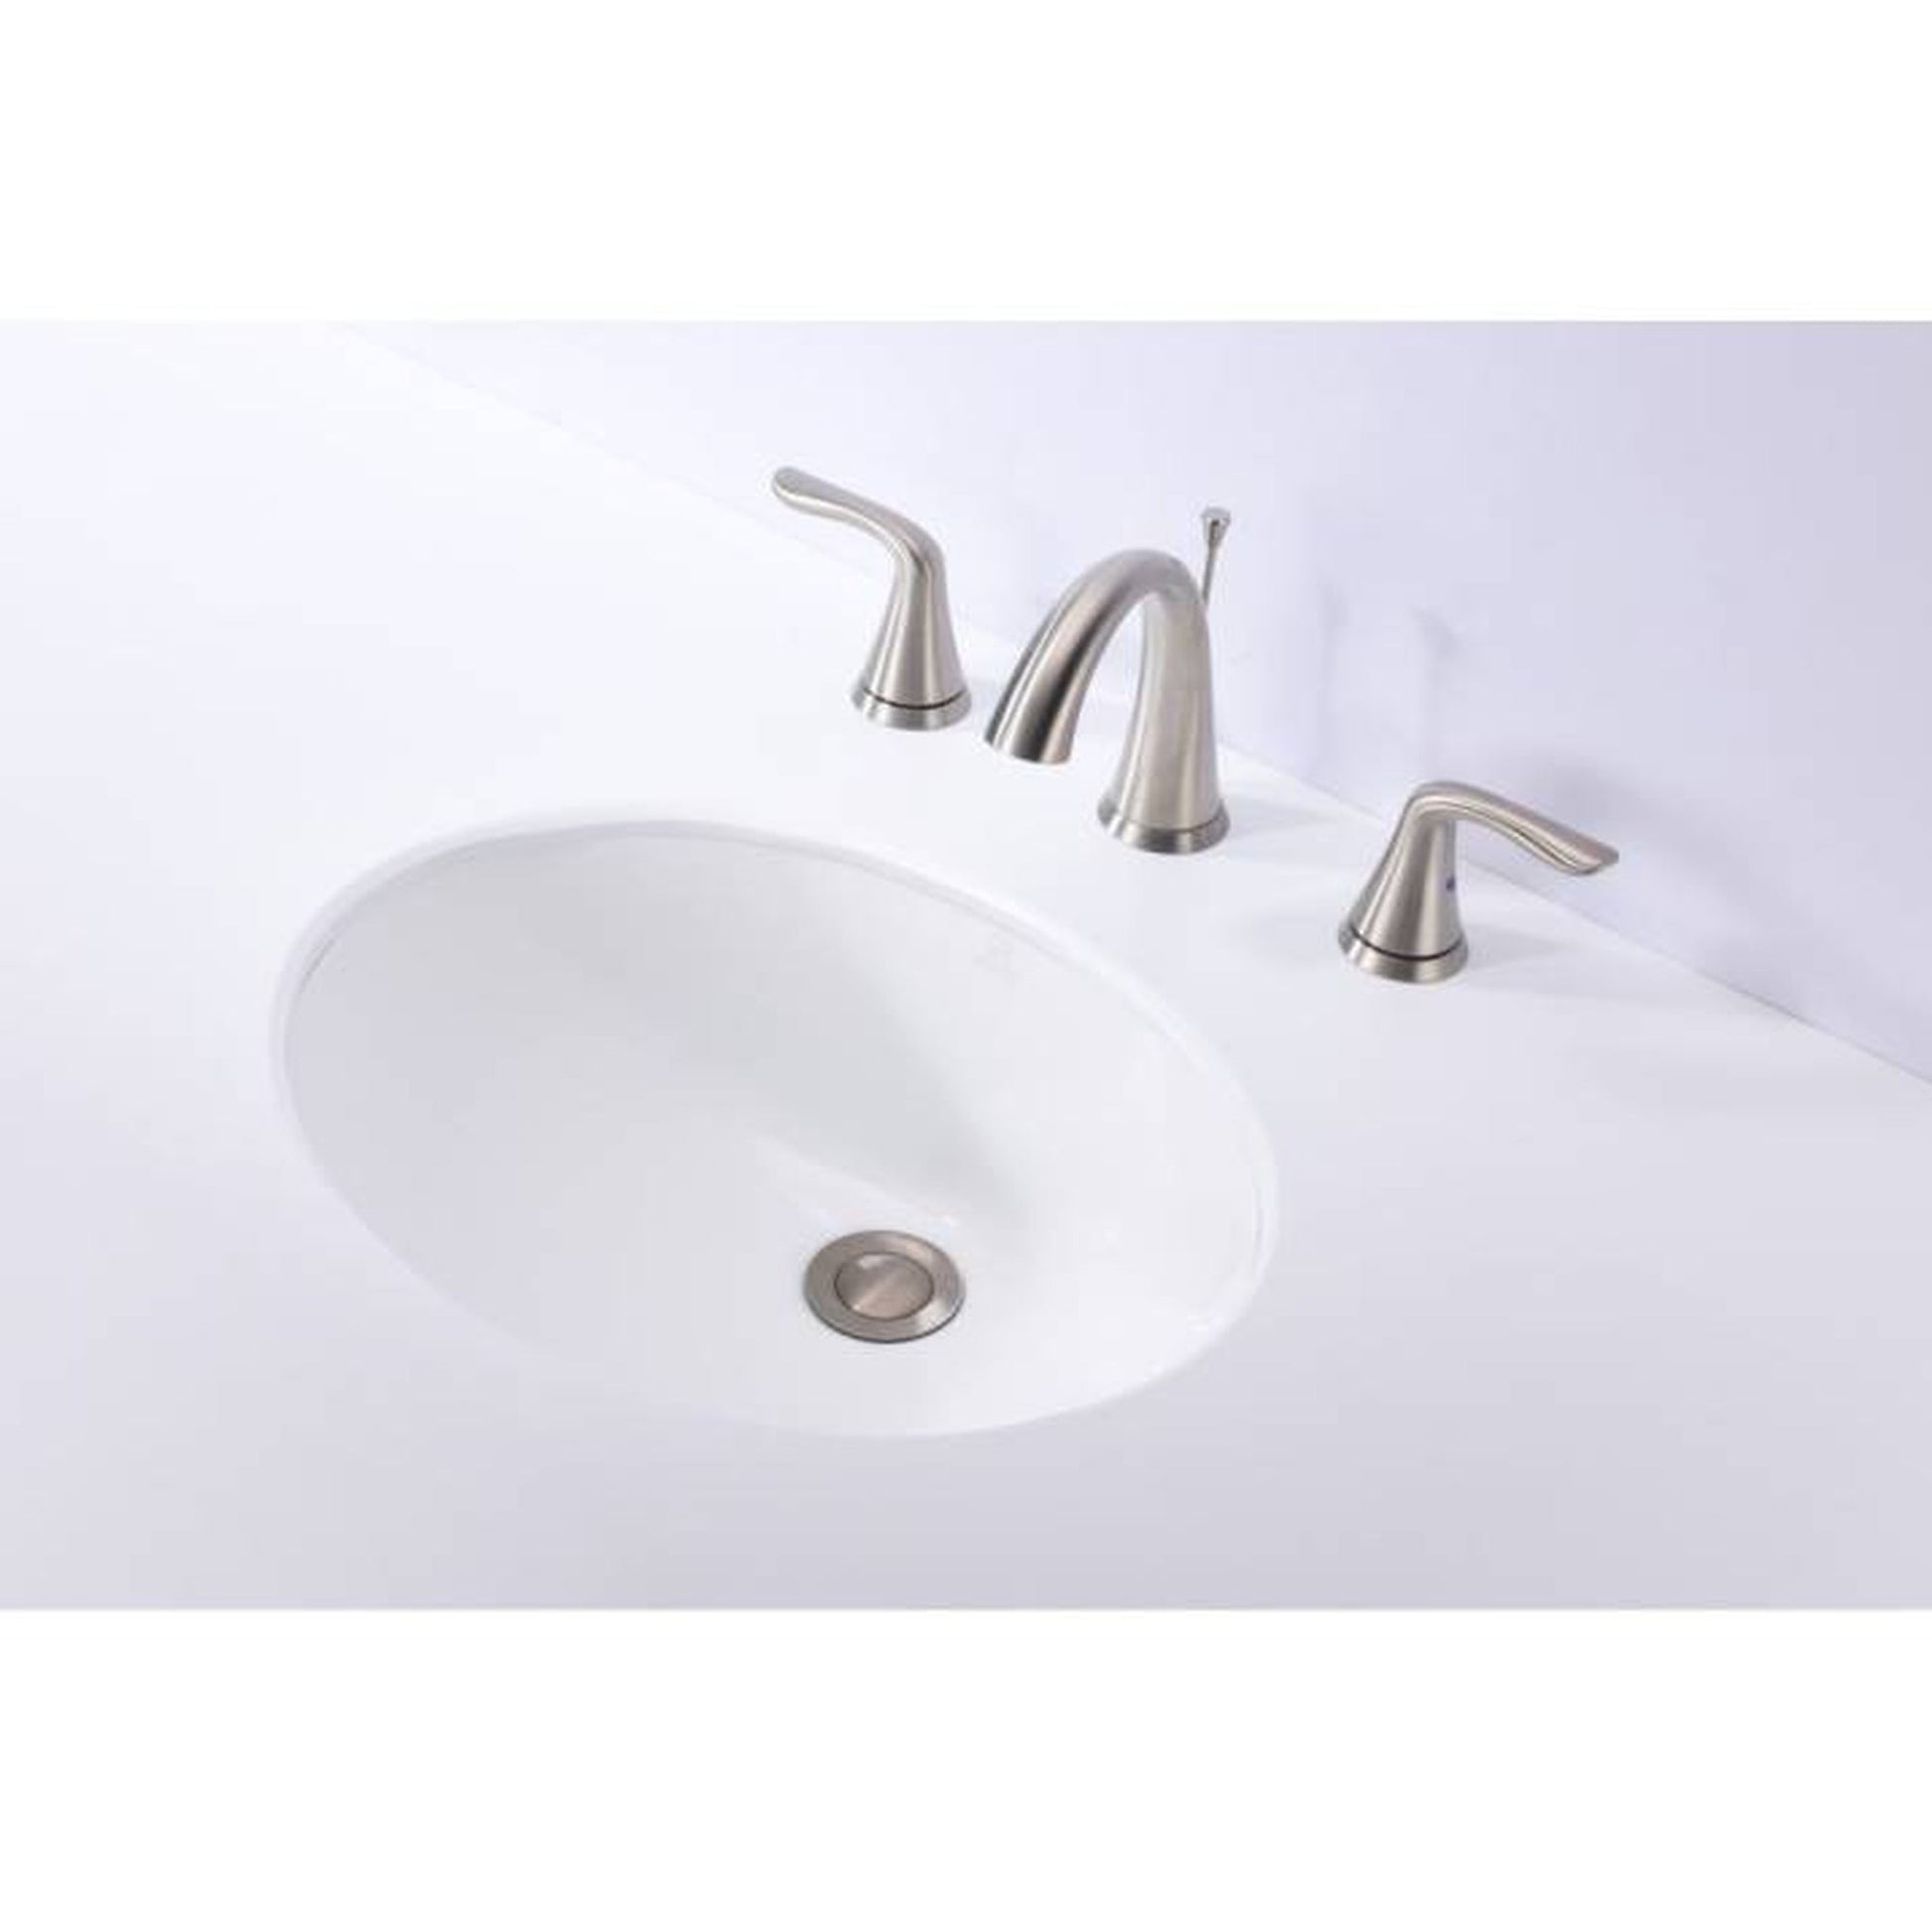 ANZZI Rhodes Series 21.5" x 15" Oval Shape Glossy White Undermount Sink With Built-In Overflow